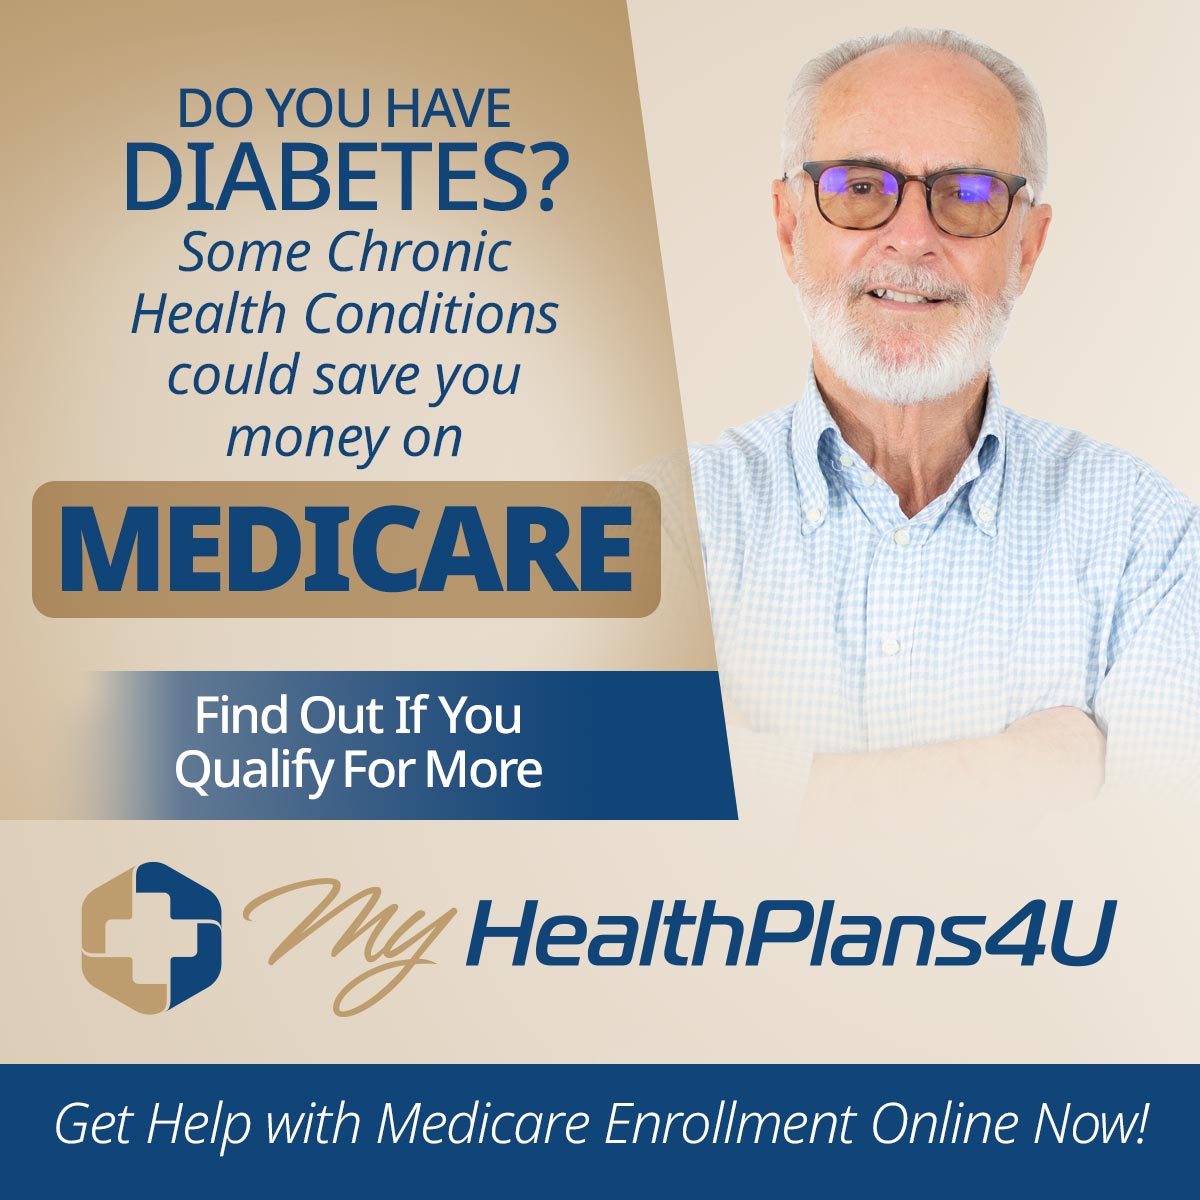 Do you have diabetes? You could save money on Medicare. Find out if you qualify for more. My Medicare Plans 4 U. Get help with Medicare online now!